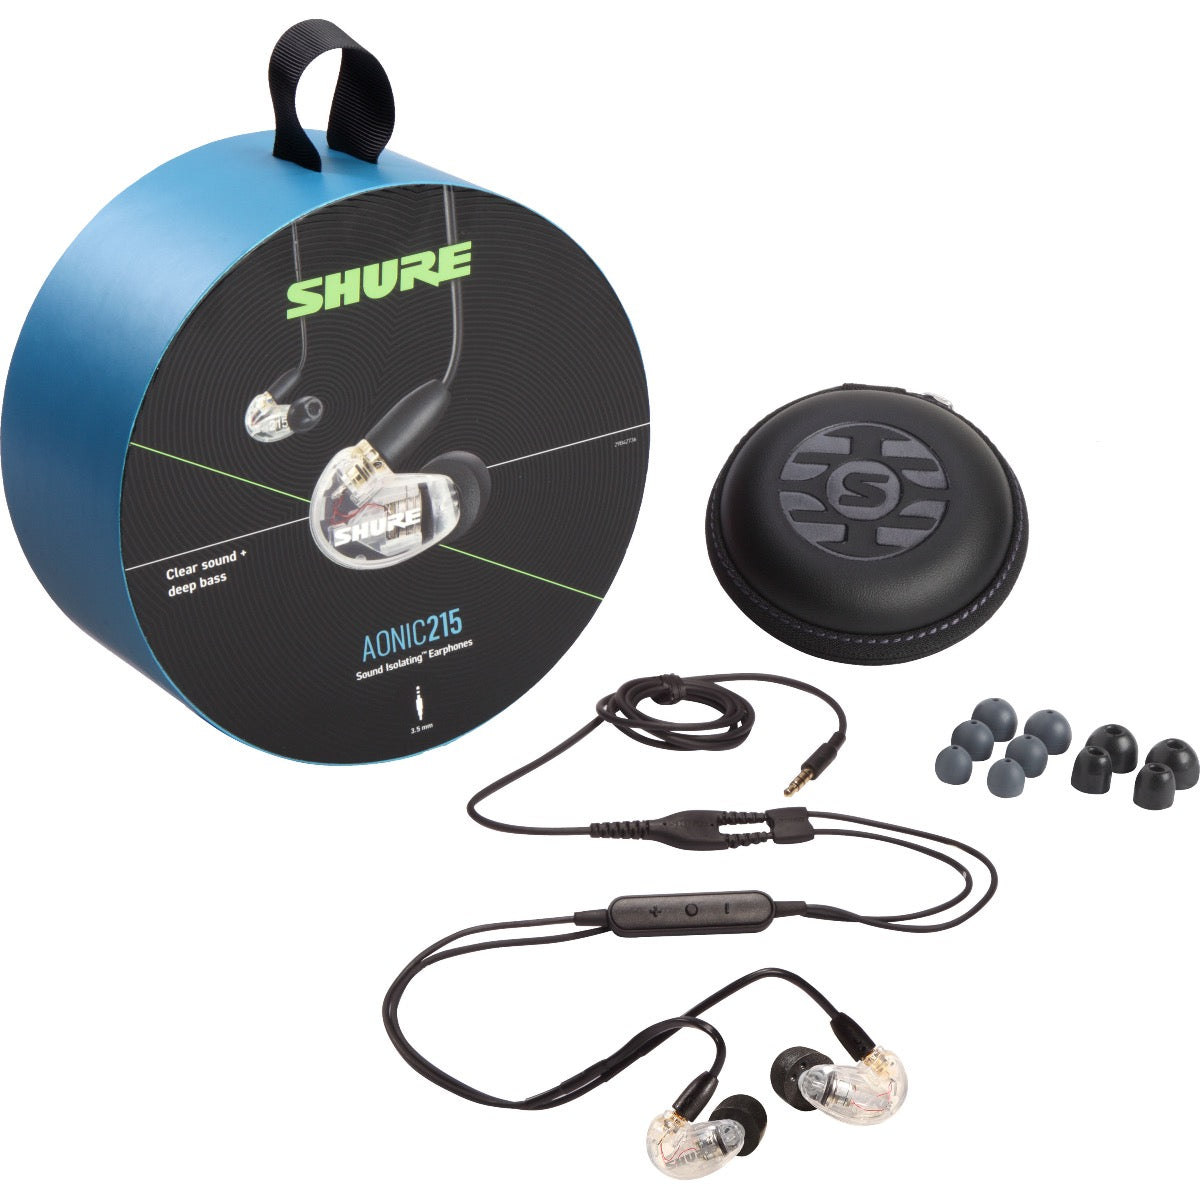 3/4 view of Shure AONIC 215 Sound Isolating Earphones - Clear packaging and components showing top, front and left sides